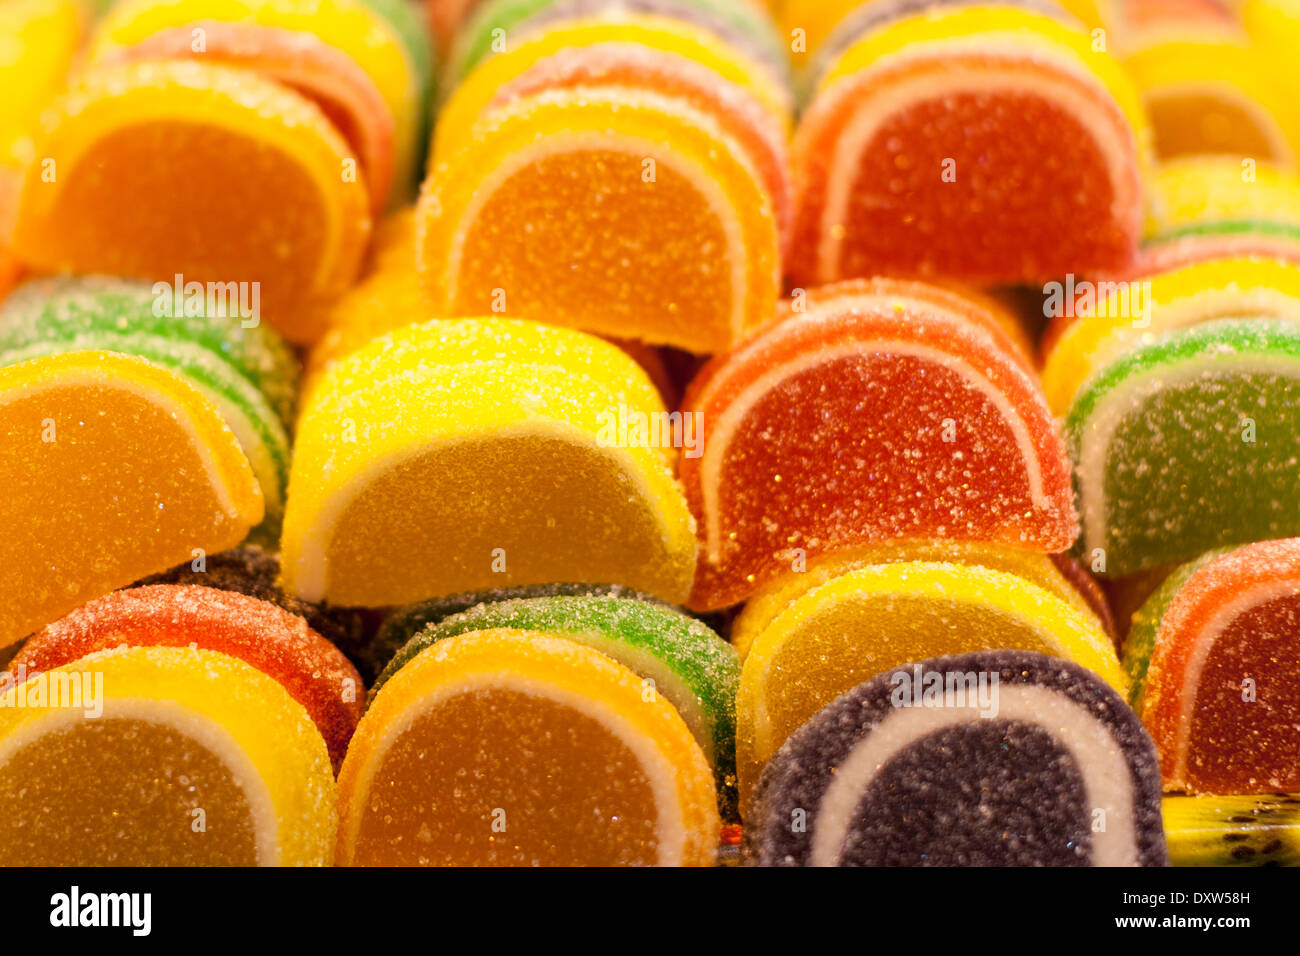 Colorful Sweets in turkish market stall Stock Photo